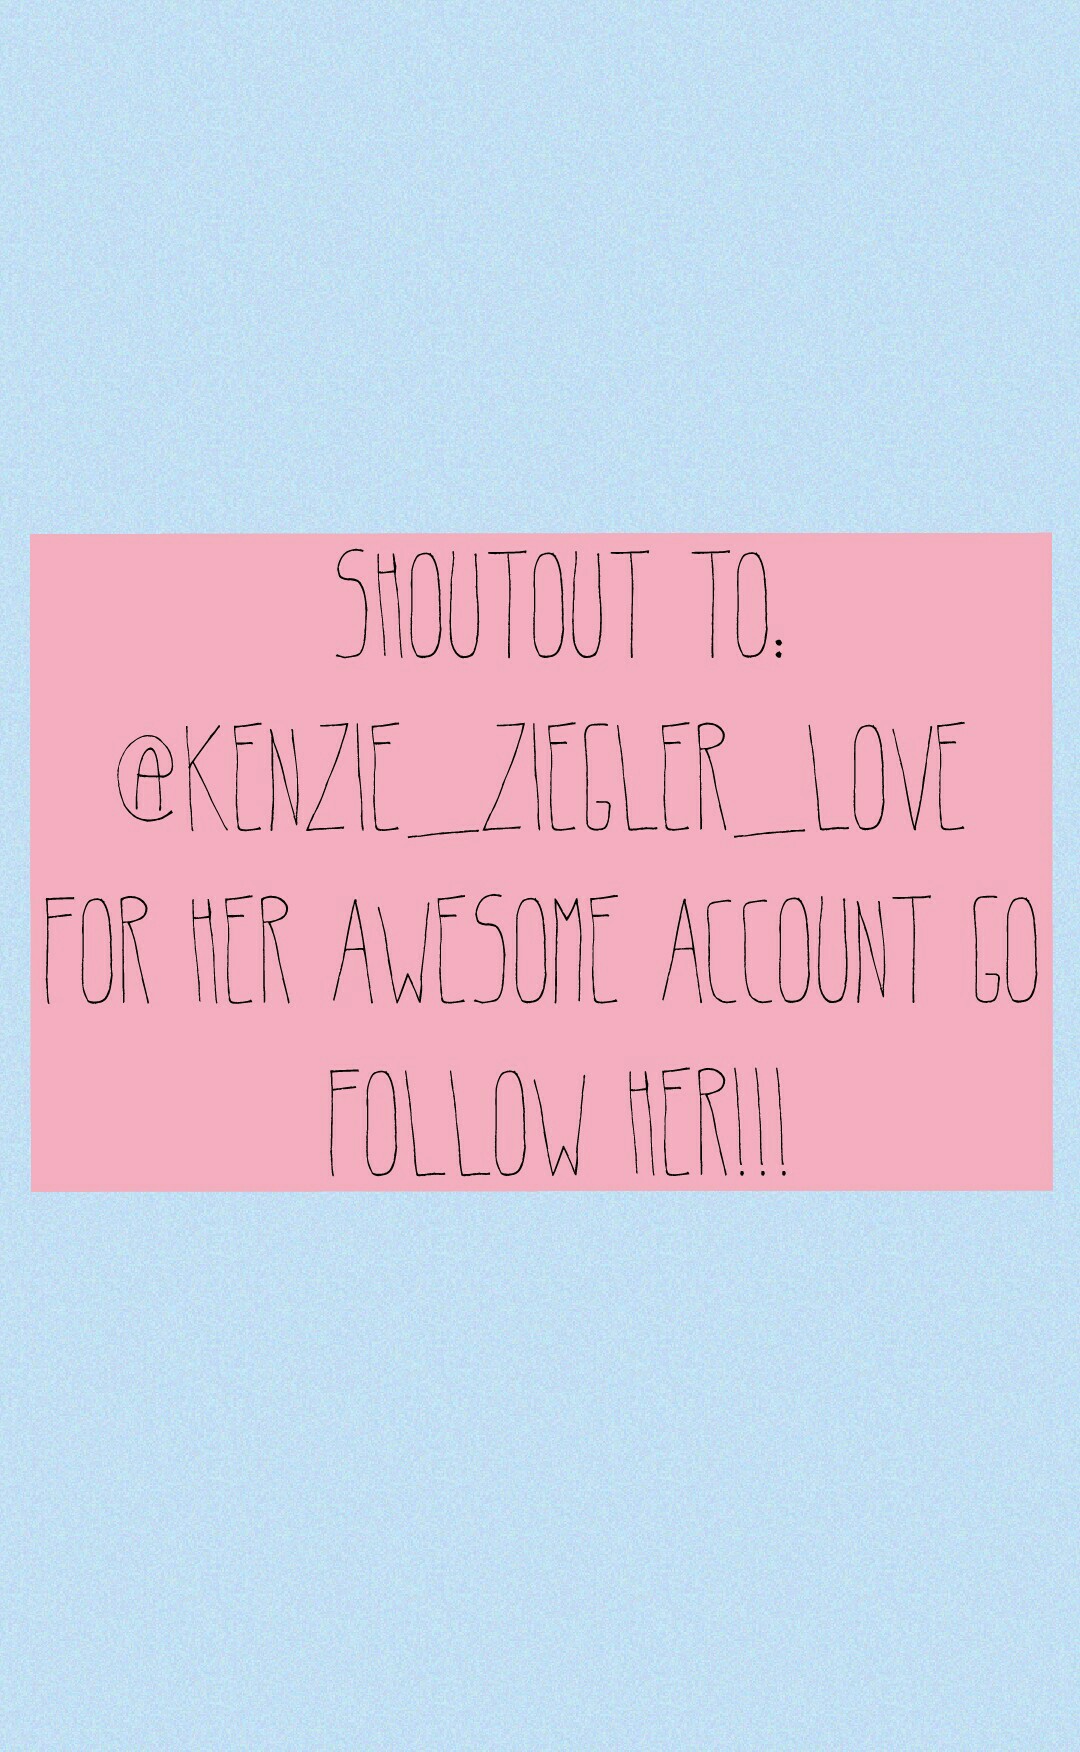 🙉Click Here🙉
Ok so first of all gi follow @Kenzie_Ziegler_Love 💜 she is awesome!! also i might be posting some new contests soon so stay posted for those👍....also i have a swim meet🏊 tomorrow so i hope you guys wish me luck...love ya!!!💙